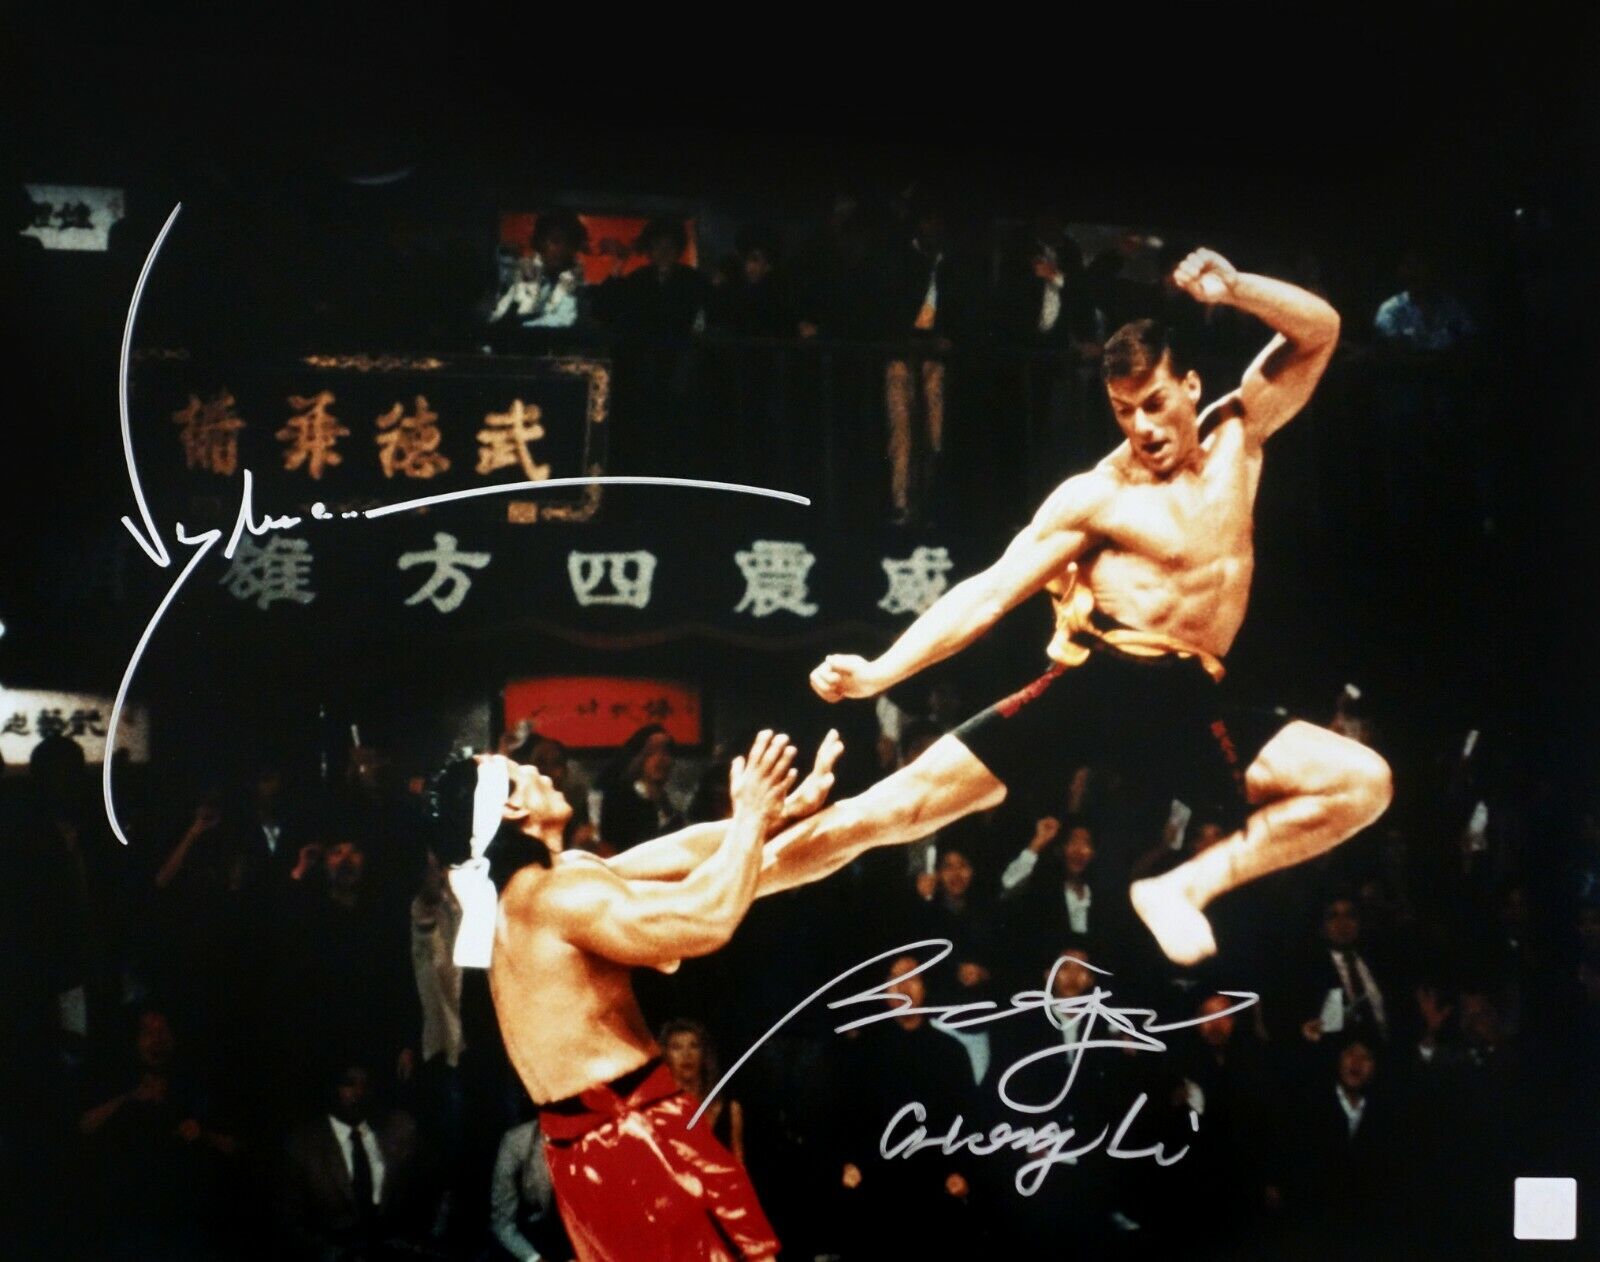 Jean Claude Van Damme & Bolo Yeung Autographed Kick 16x20 Photo Poster painting ASI Proof